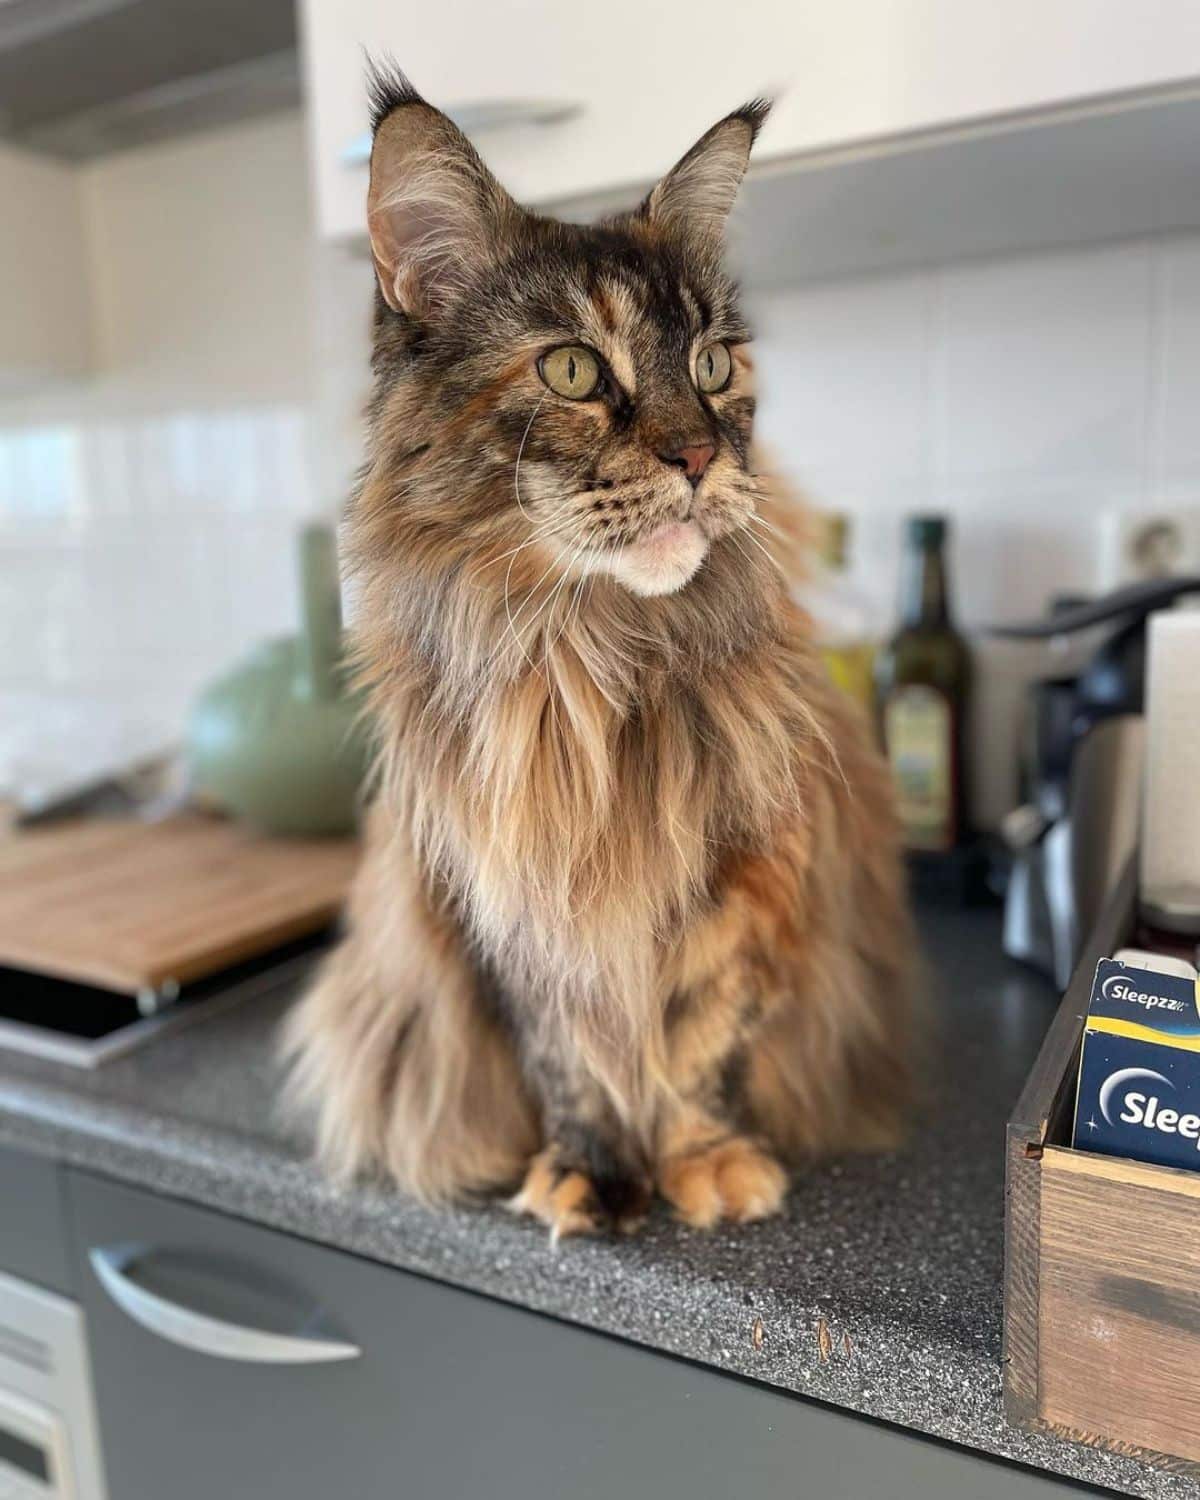 A fluffy beautiful maine coon sitting on a kitchen counter.